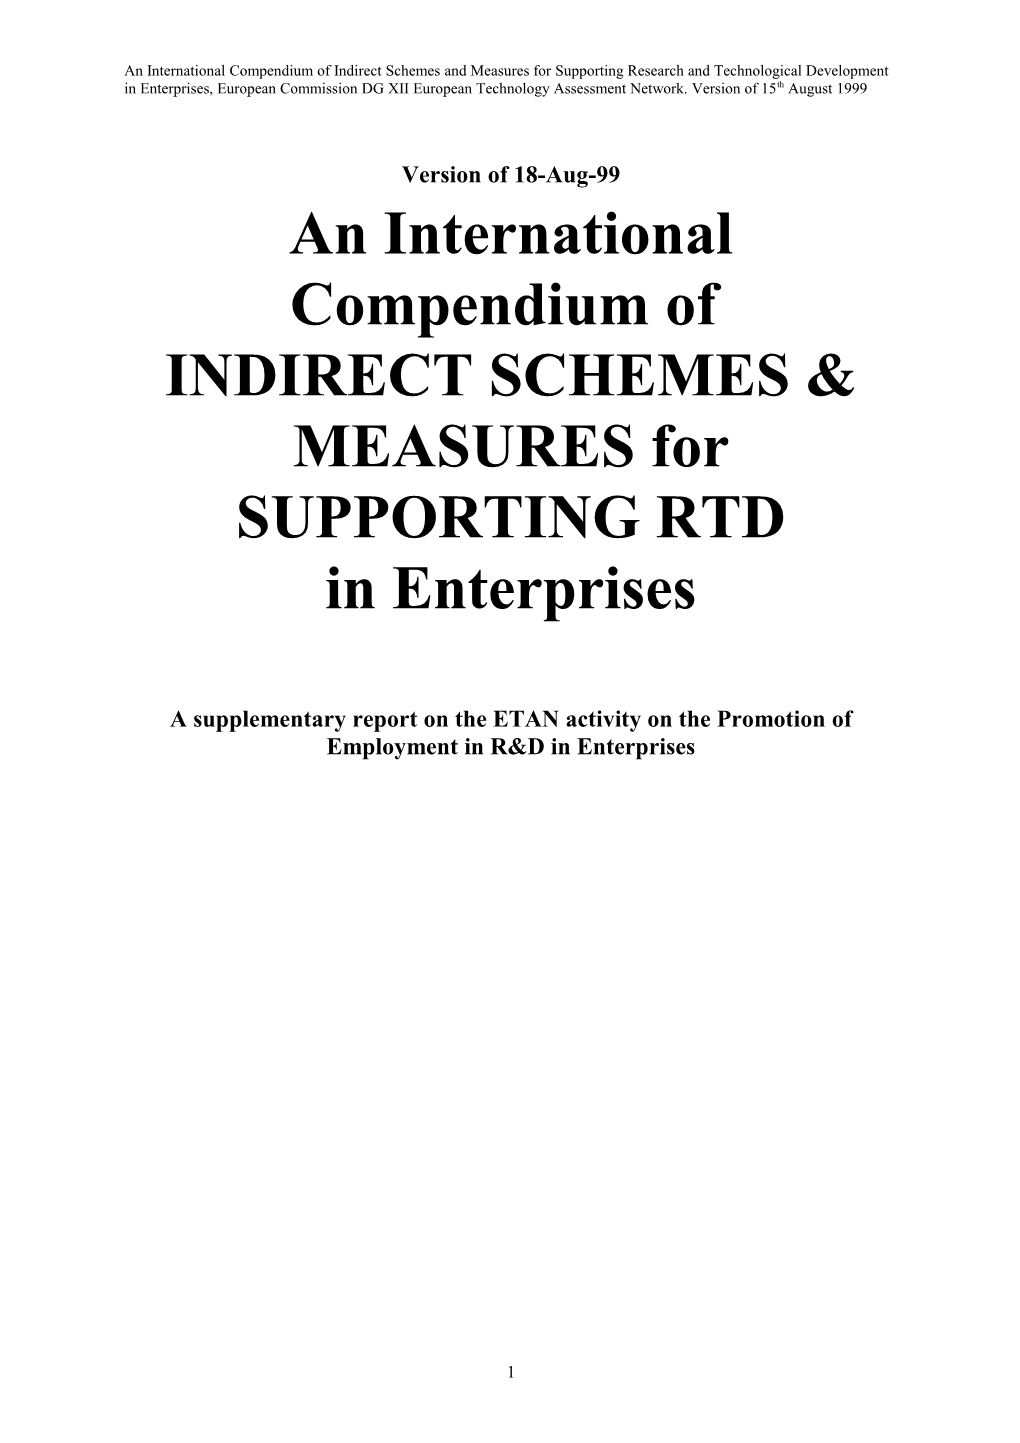 INDIRECT SCHEMES & MEASURES for SUPPORTING RTD